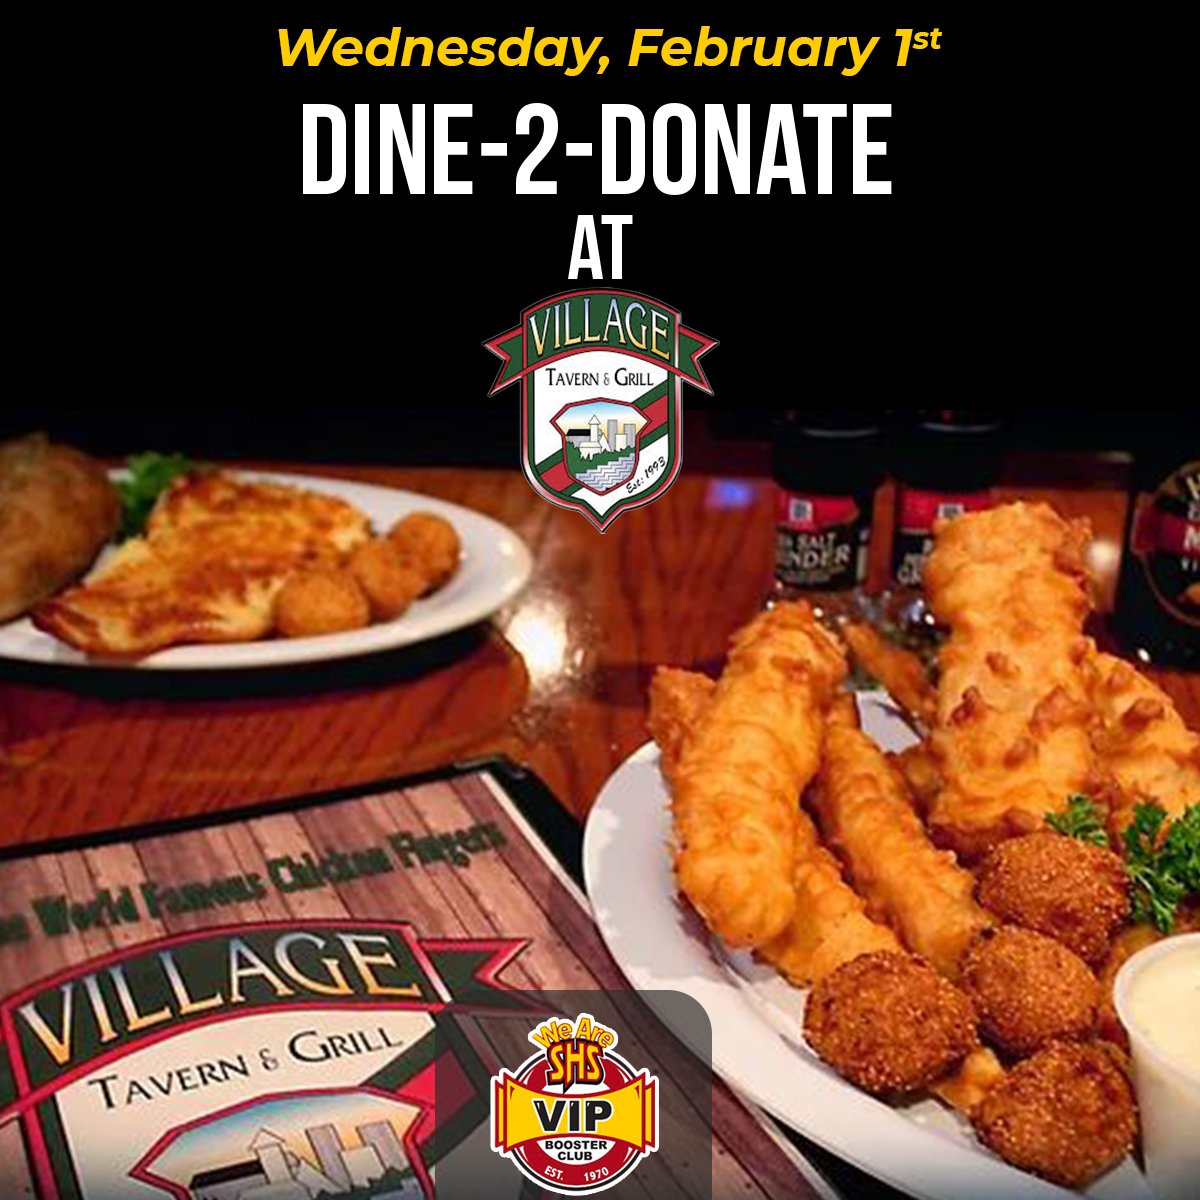 Today Wednesday is Dine-2-Donate at Village Tavern & Grill!
901 W. Wise Rd. Schaumburg, IL.
20% of your pre-tax bill will benefit the Schaumburg High School VIP Booster Club.
#vipboosters #SHS #villagetavern #Dine2Donate #support